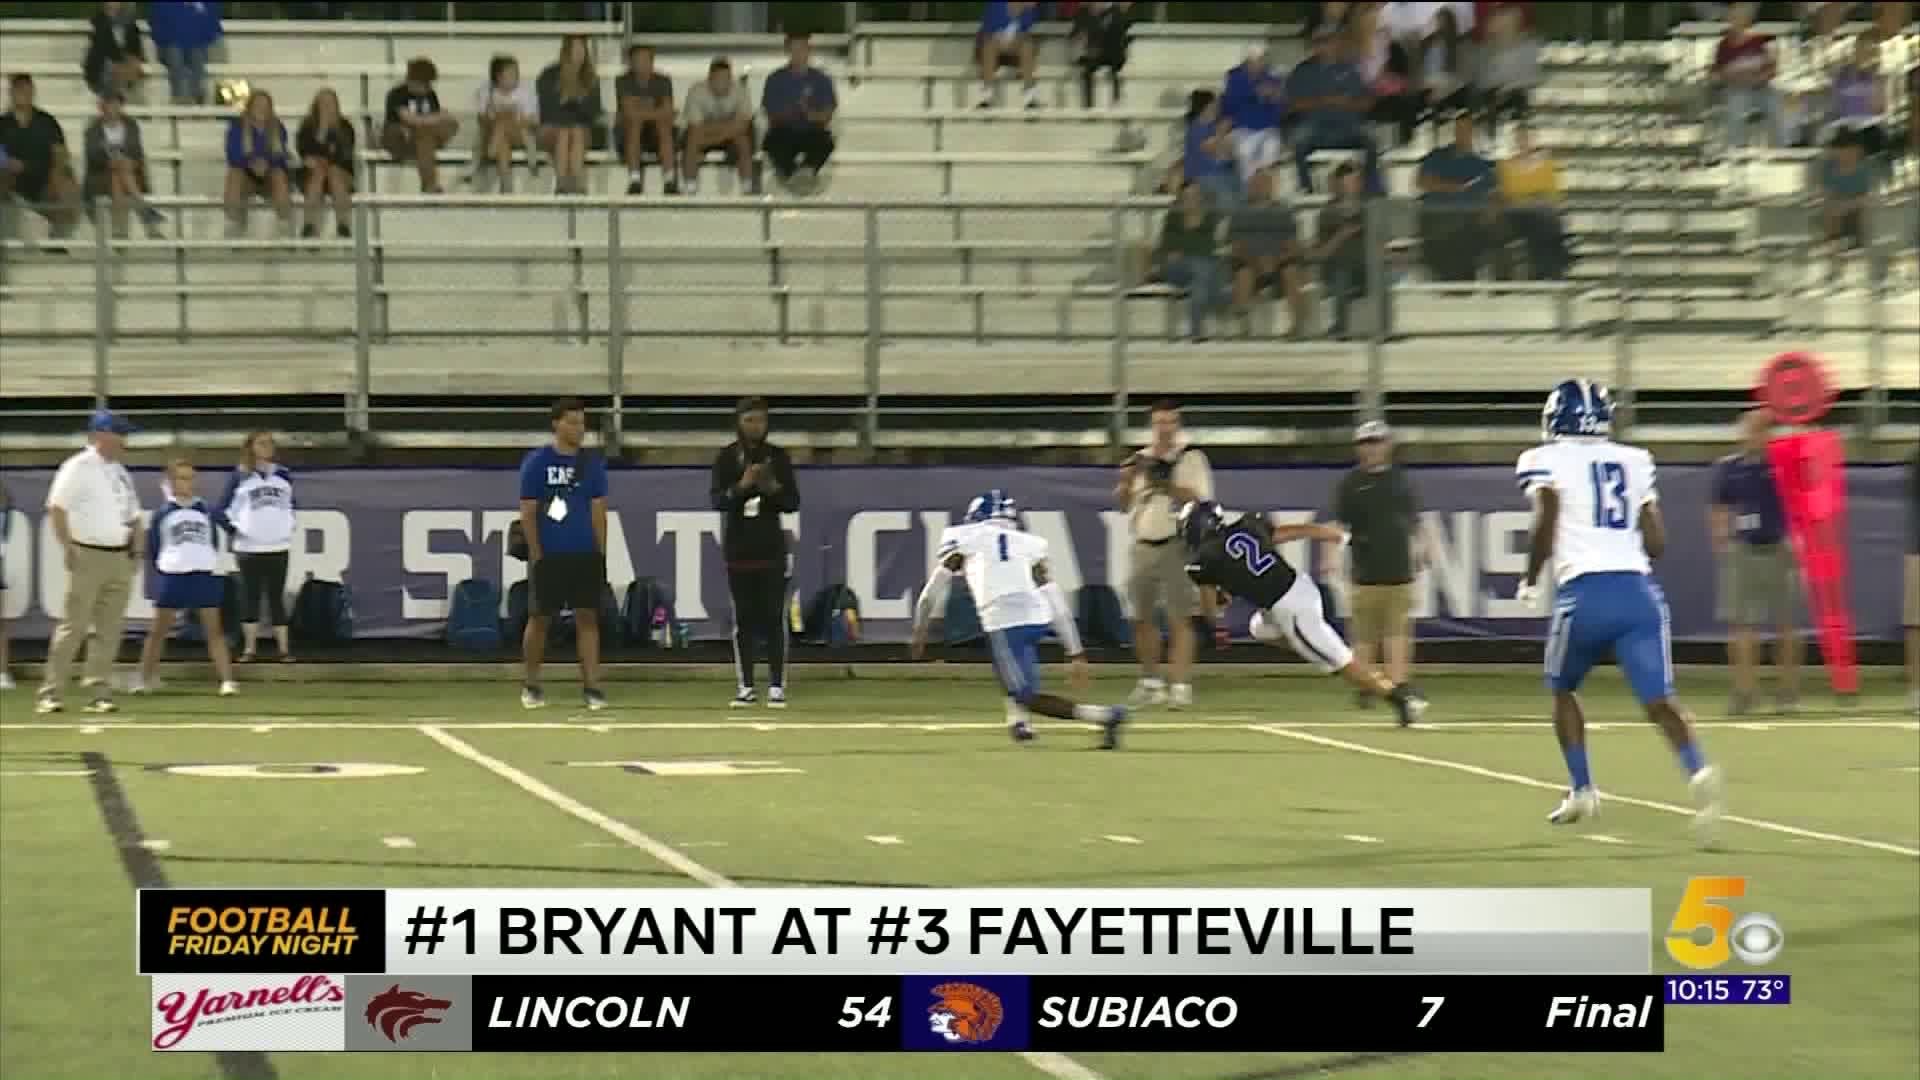 Game of the Week - Bryant at Fayetteville